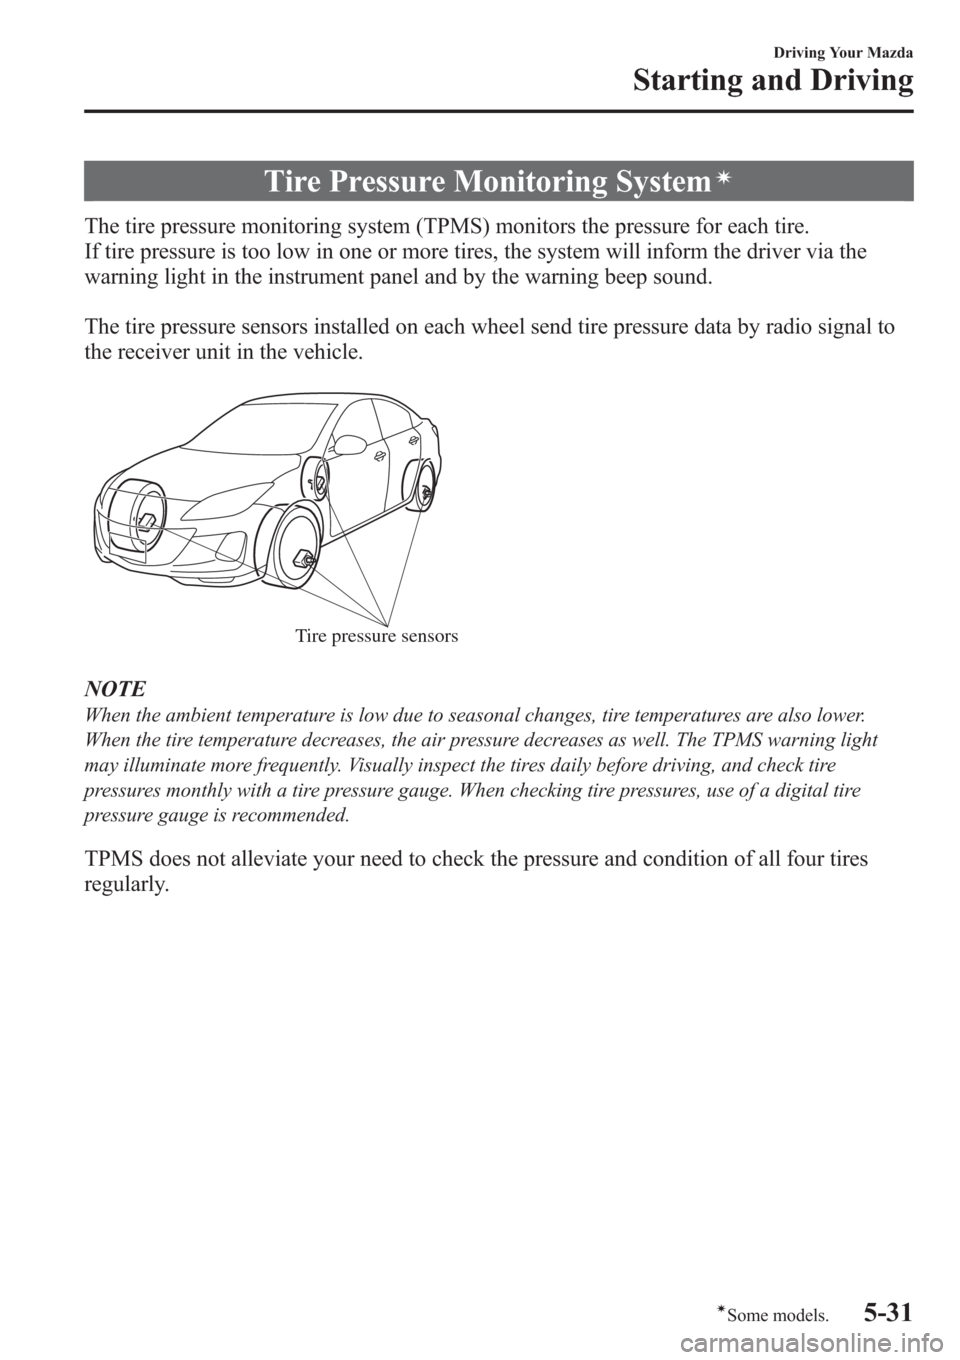 MAZDA MODEL 3 HATCHBACK 2013  Owners Manual (in English) Tire Pressure Monitoring Systemí
The tire pressure monitoring system (TPMS) monitors the pressure for each tire.
If tire pressure is too low in one or more tires, the system will inform the driver vi